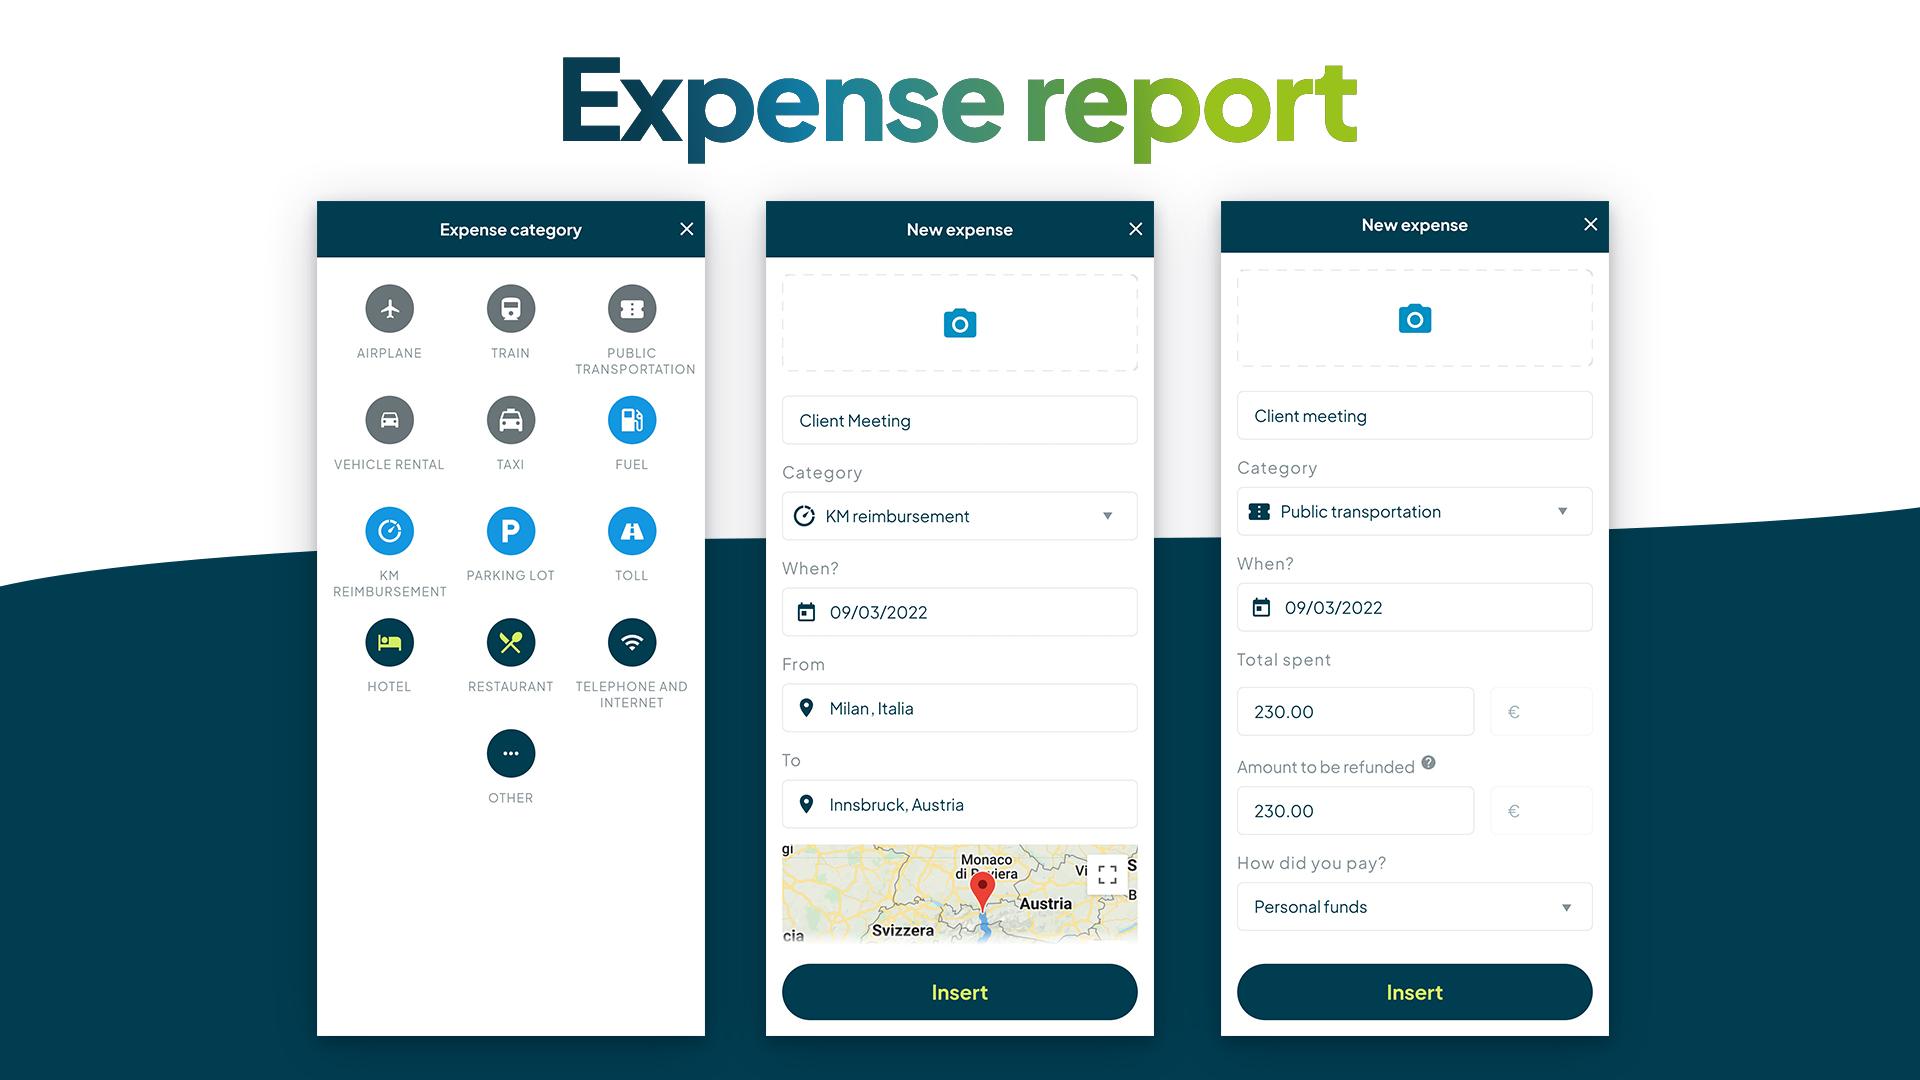 Expense reports